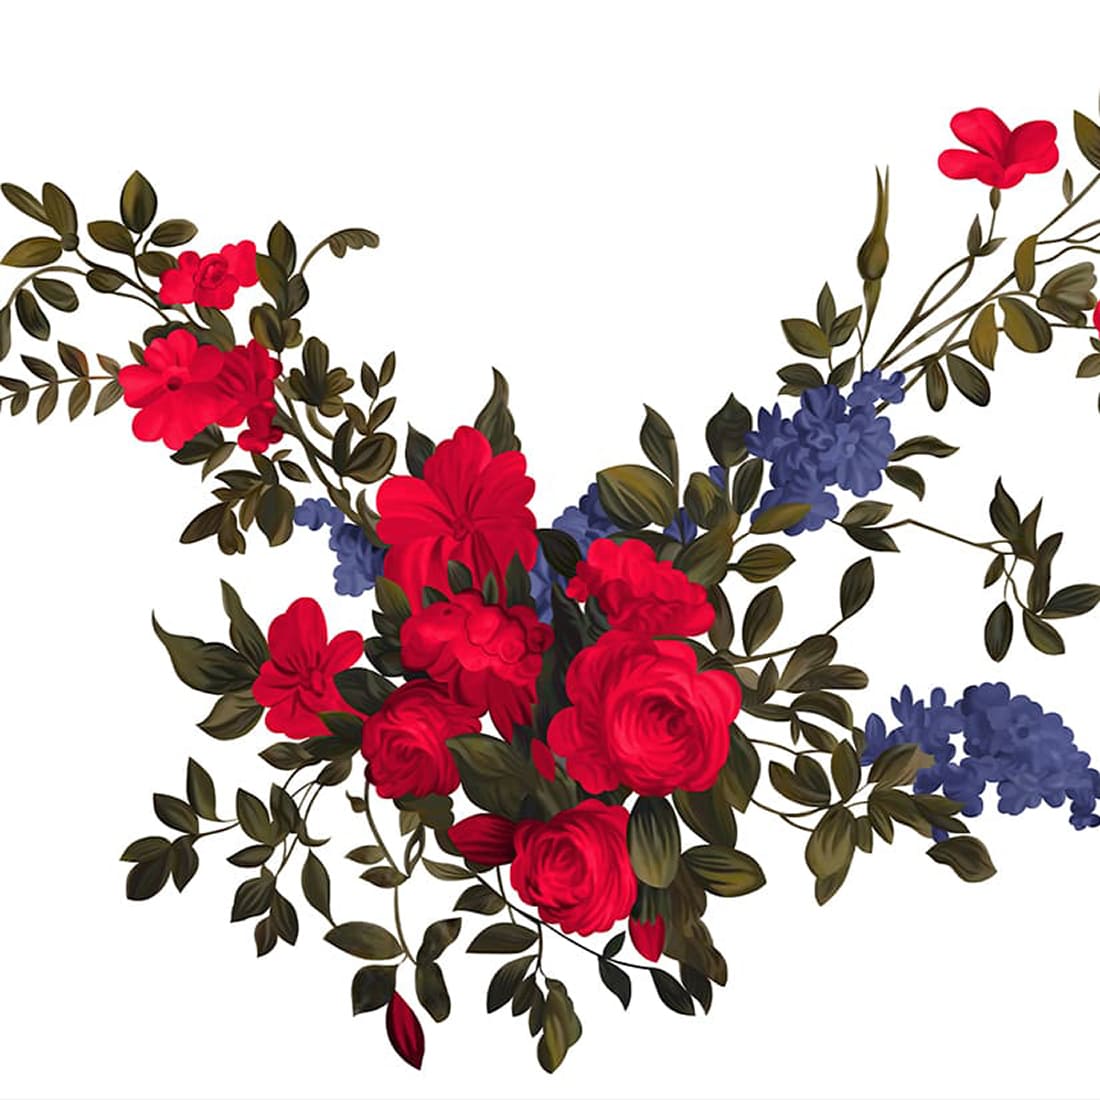 Flower illustrations motive It can be used in digital print with high-resolution 300 DPI PSD files preview image.